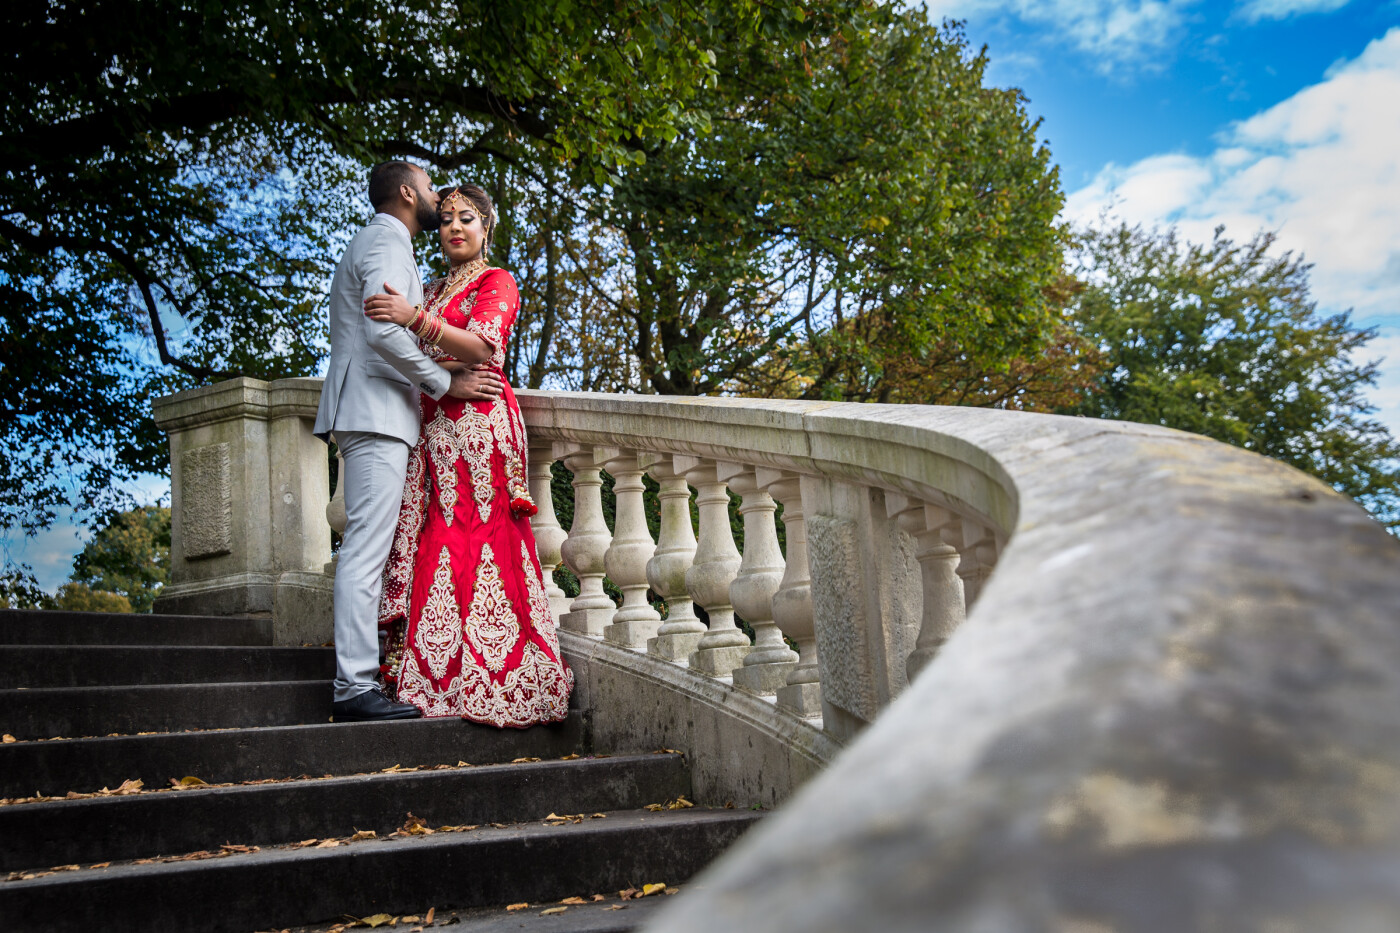 This picture was taken in the most beautiful park in the Nederlands. Clingendael in the Hague, a park with a variety of landscapes.<br />
This was an after wedding shoot of a Indian bride and groom. The bride was wearing a traditional Indian wedding dress. This shot on the stairs, was an idea of the groom. So all credits to the groom.